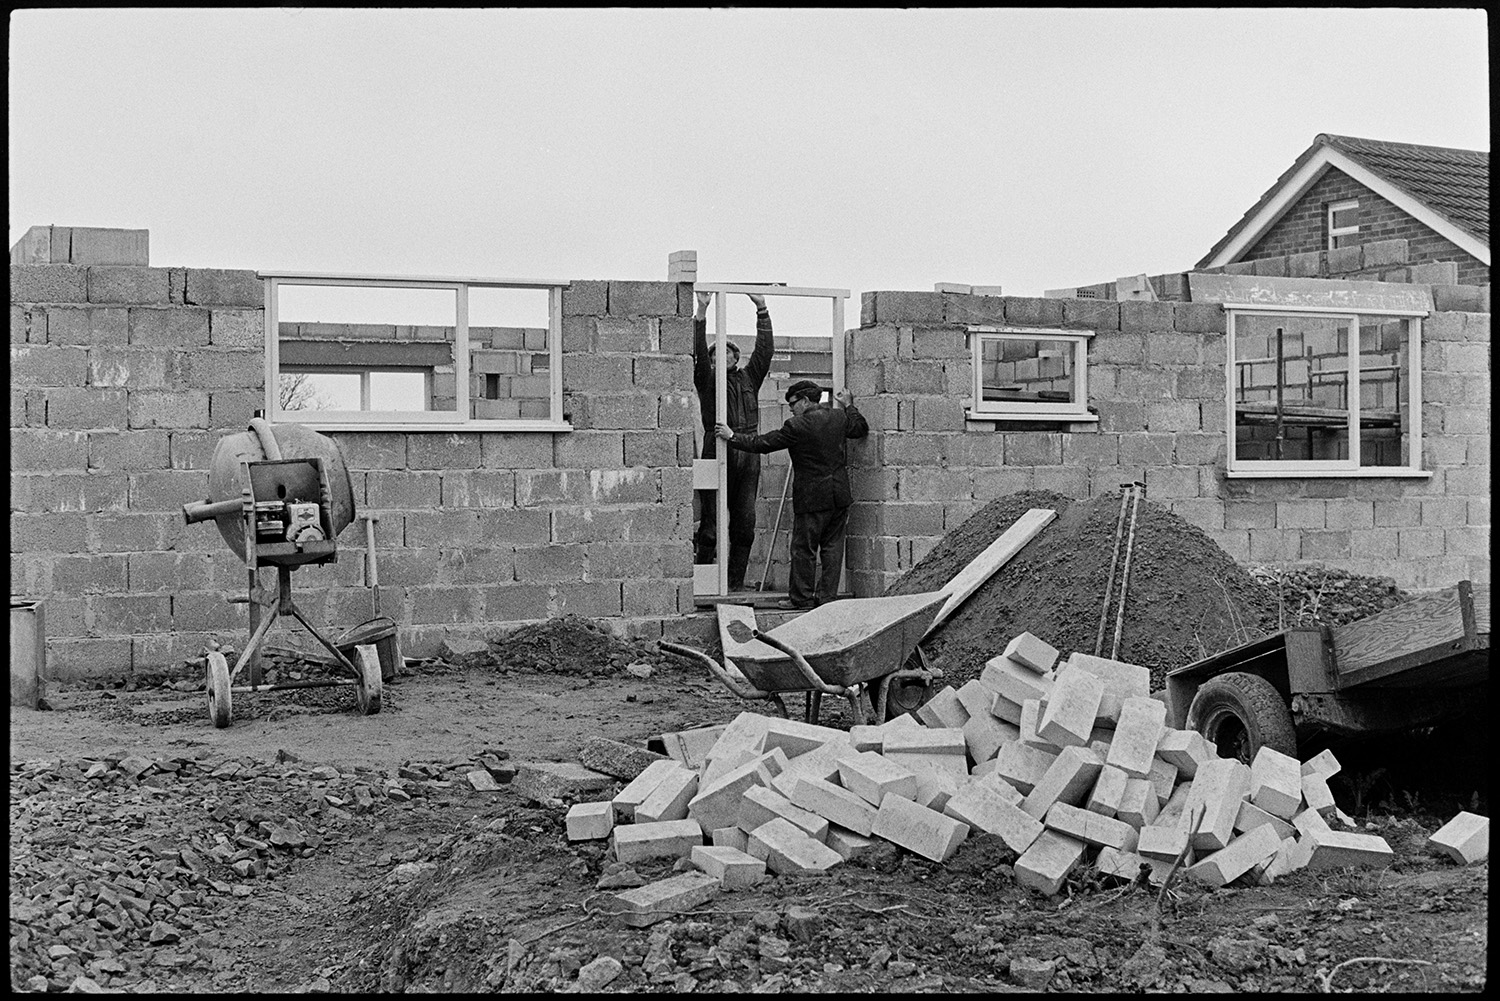 Bungalow, house being built. 
[Two men building a bungalow in Dolton, They are putting in the door frame. A cement mixer, wheelbarrow, pile of earth and bricks can be seen in the foreground.]